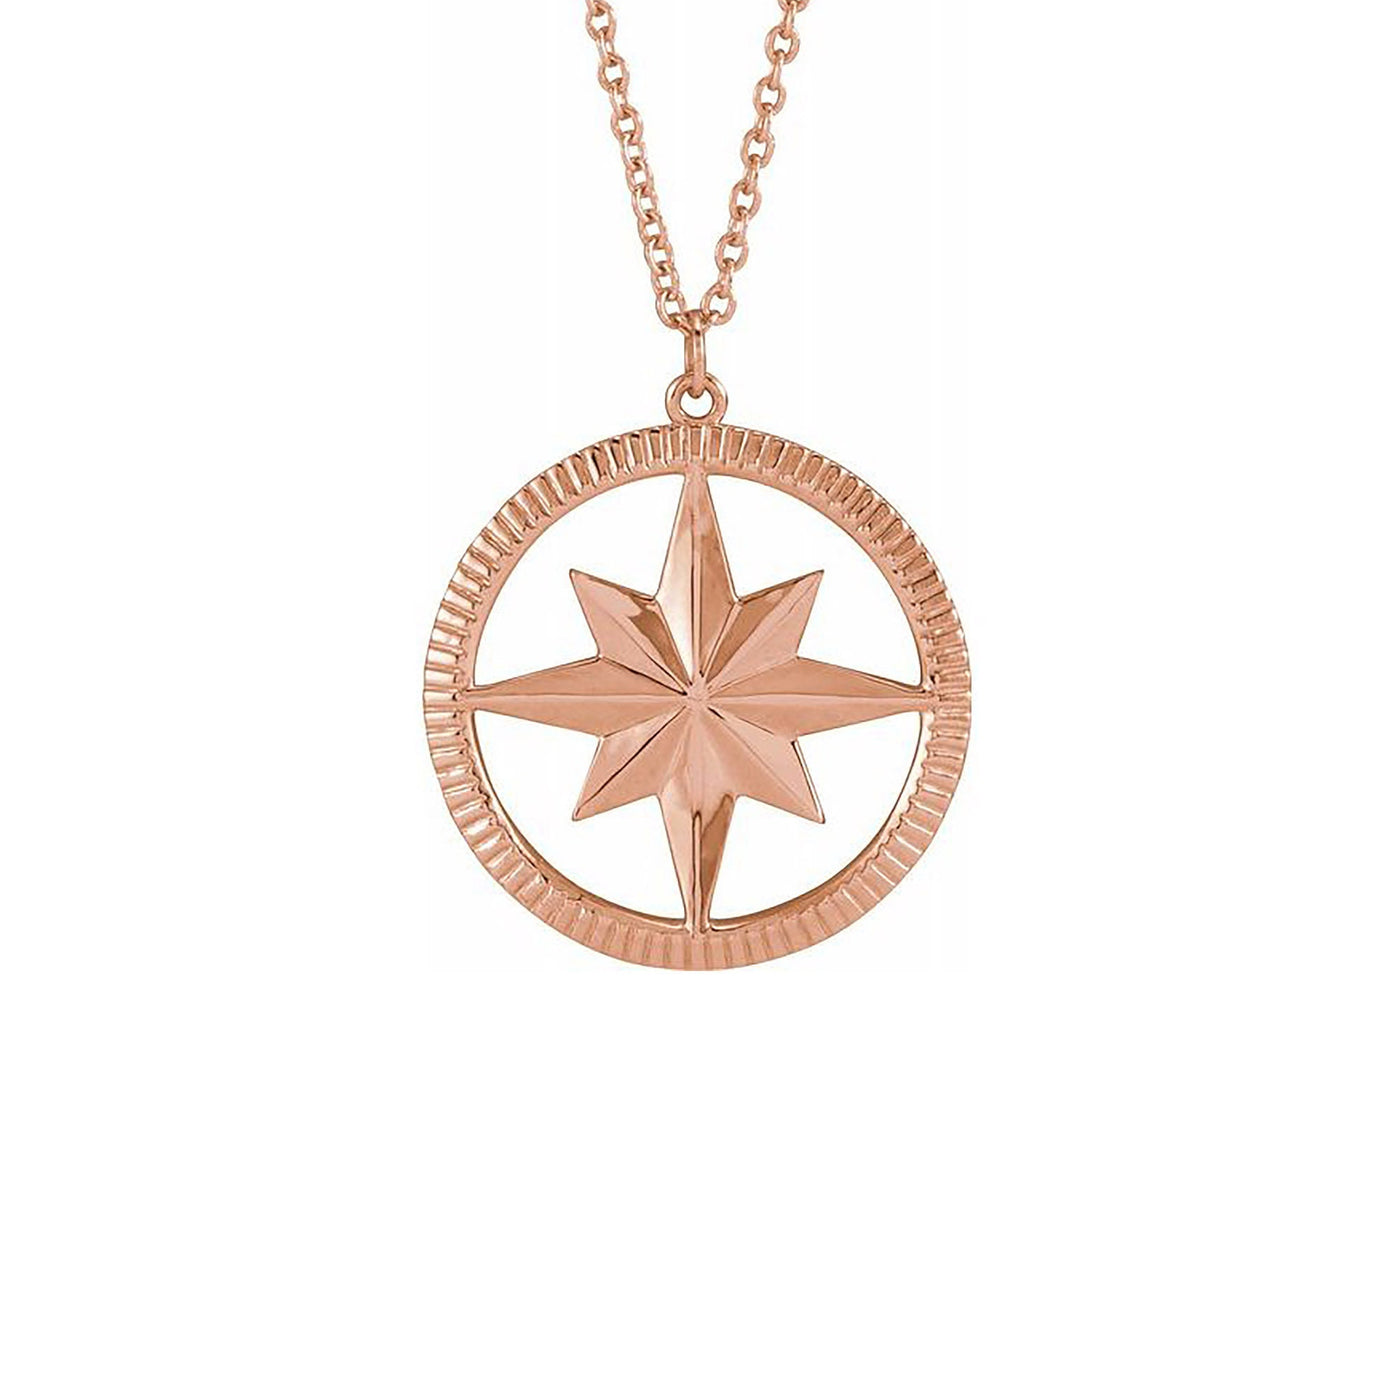 Open Compass Necklace